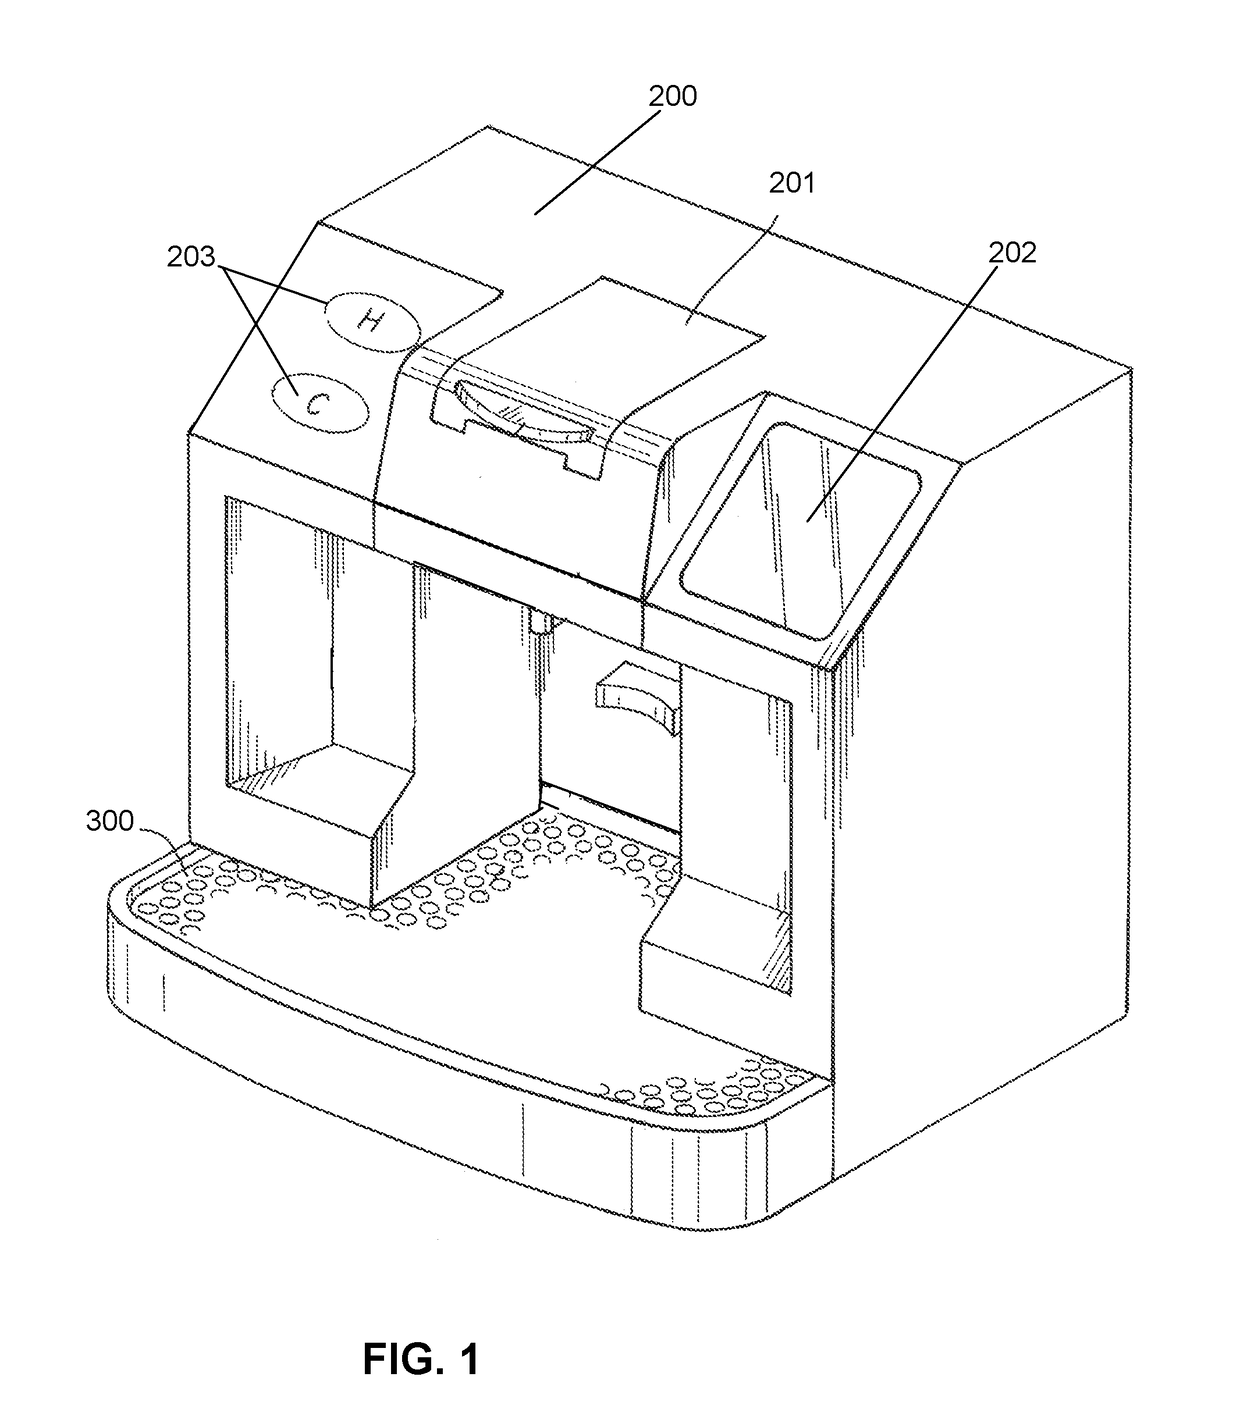 Capsule-based system for preparing and dispensing a beverage